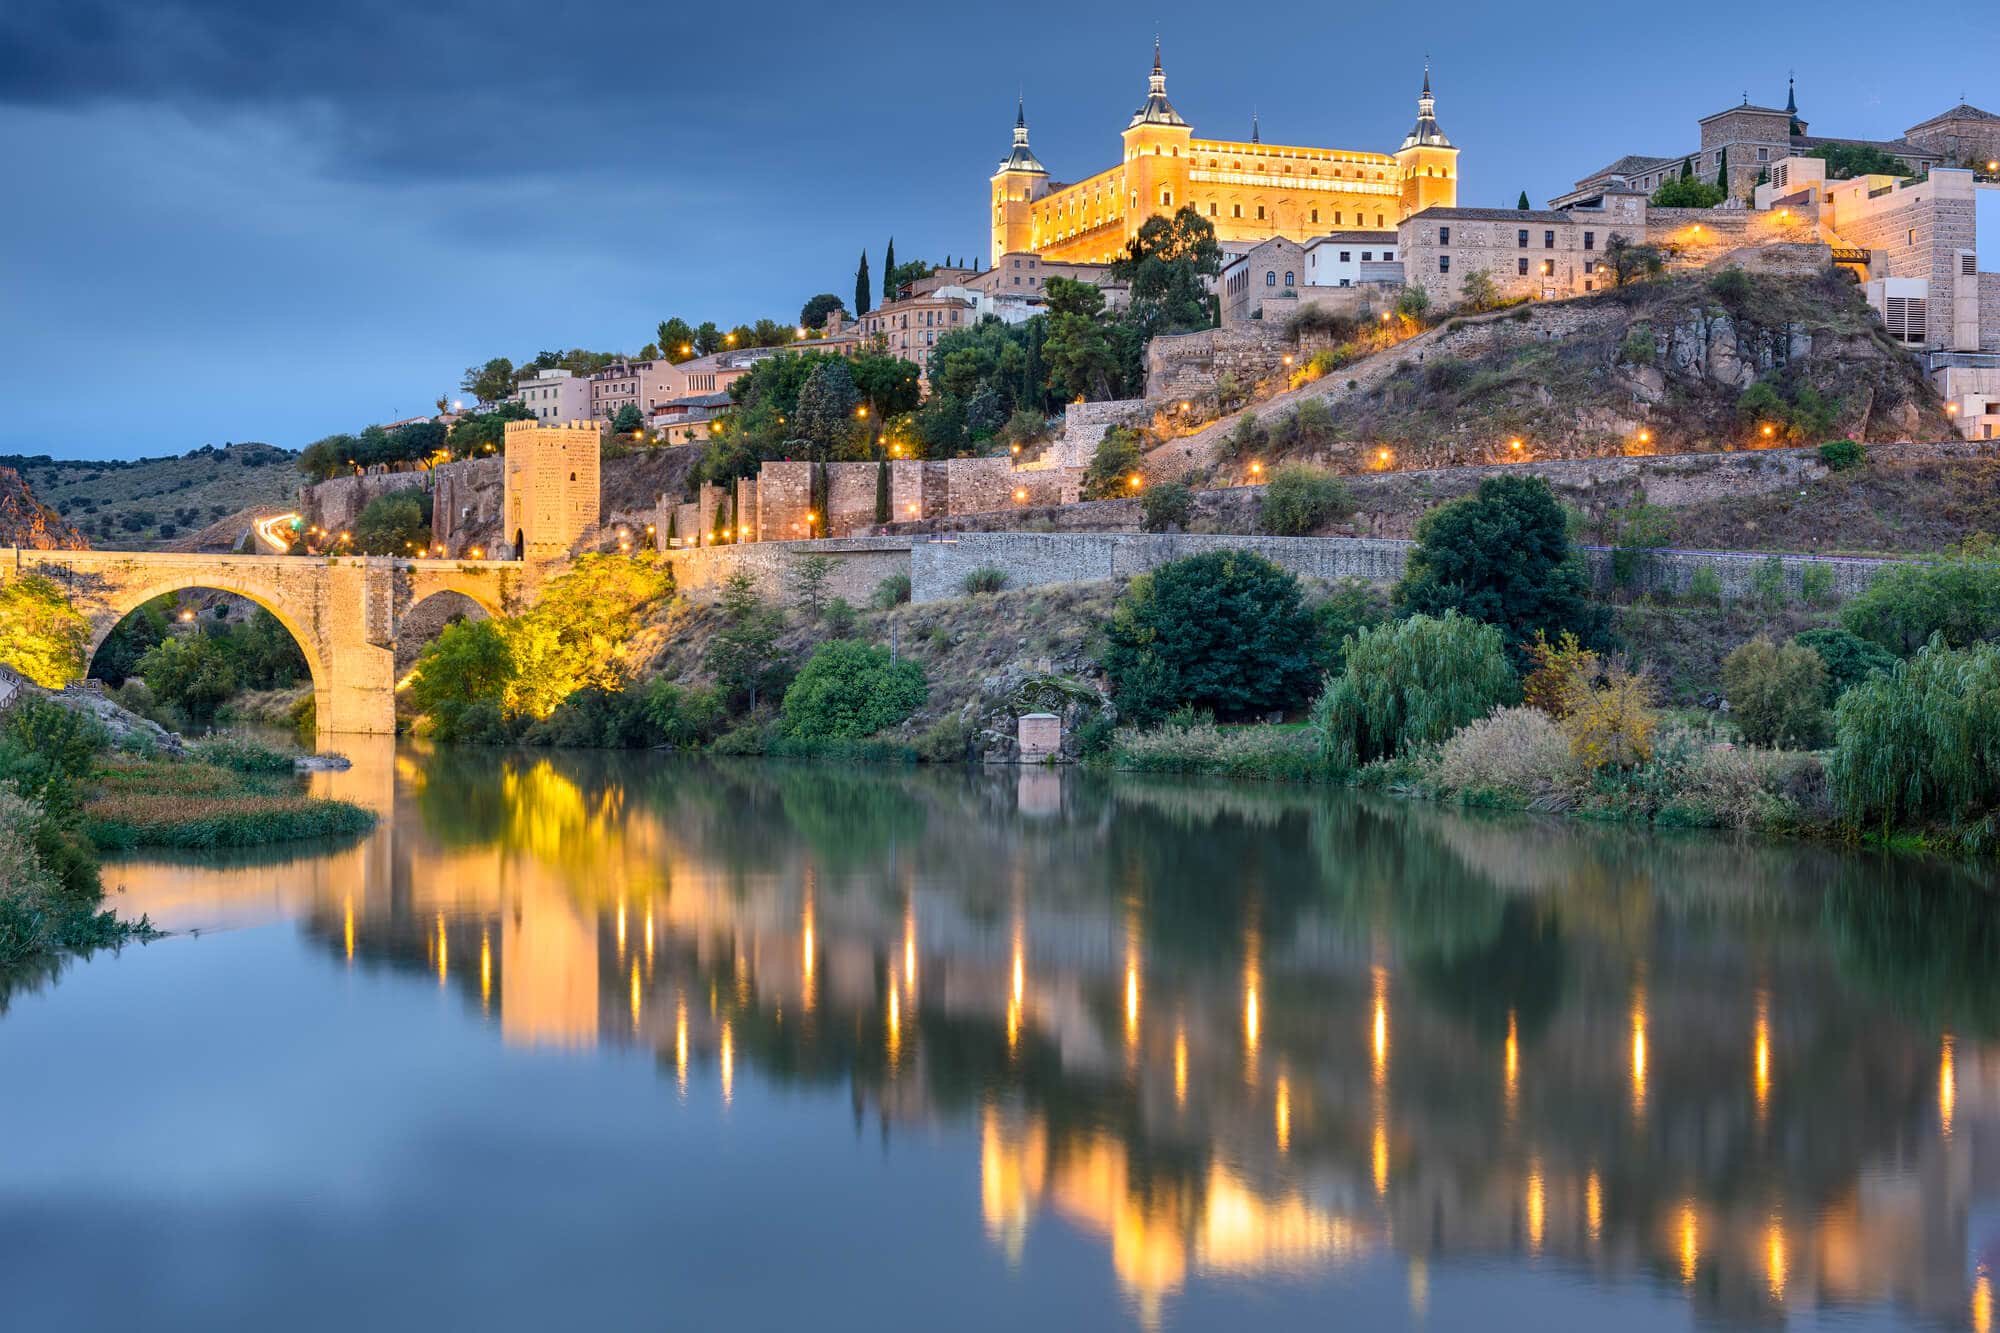 The beautiful Alcázar de Toledo lit up at dusk seen from the banks of the Tagus River - The Ultimate Spain Bucket List